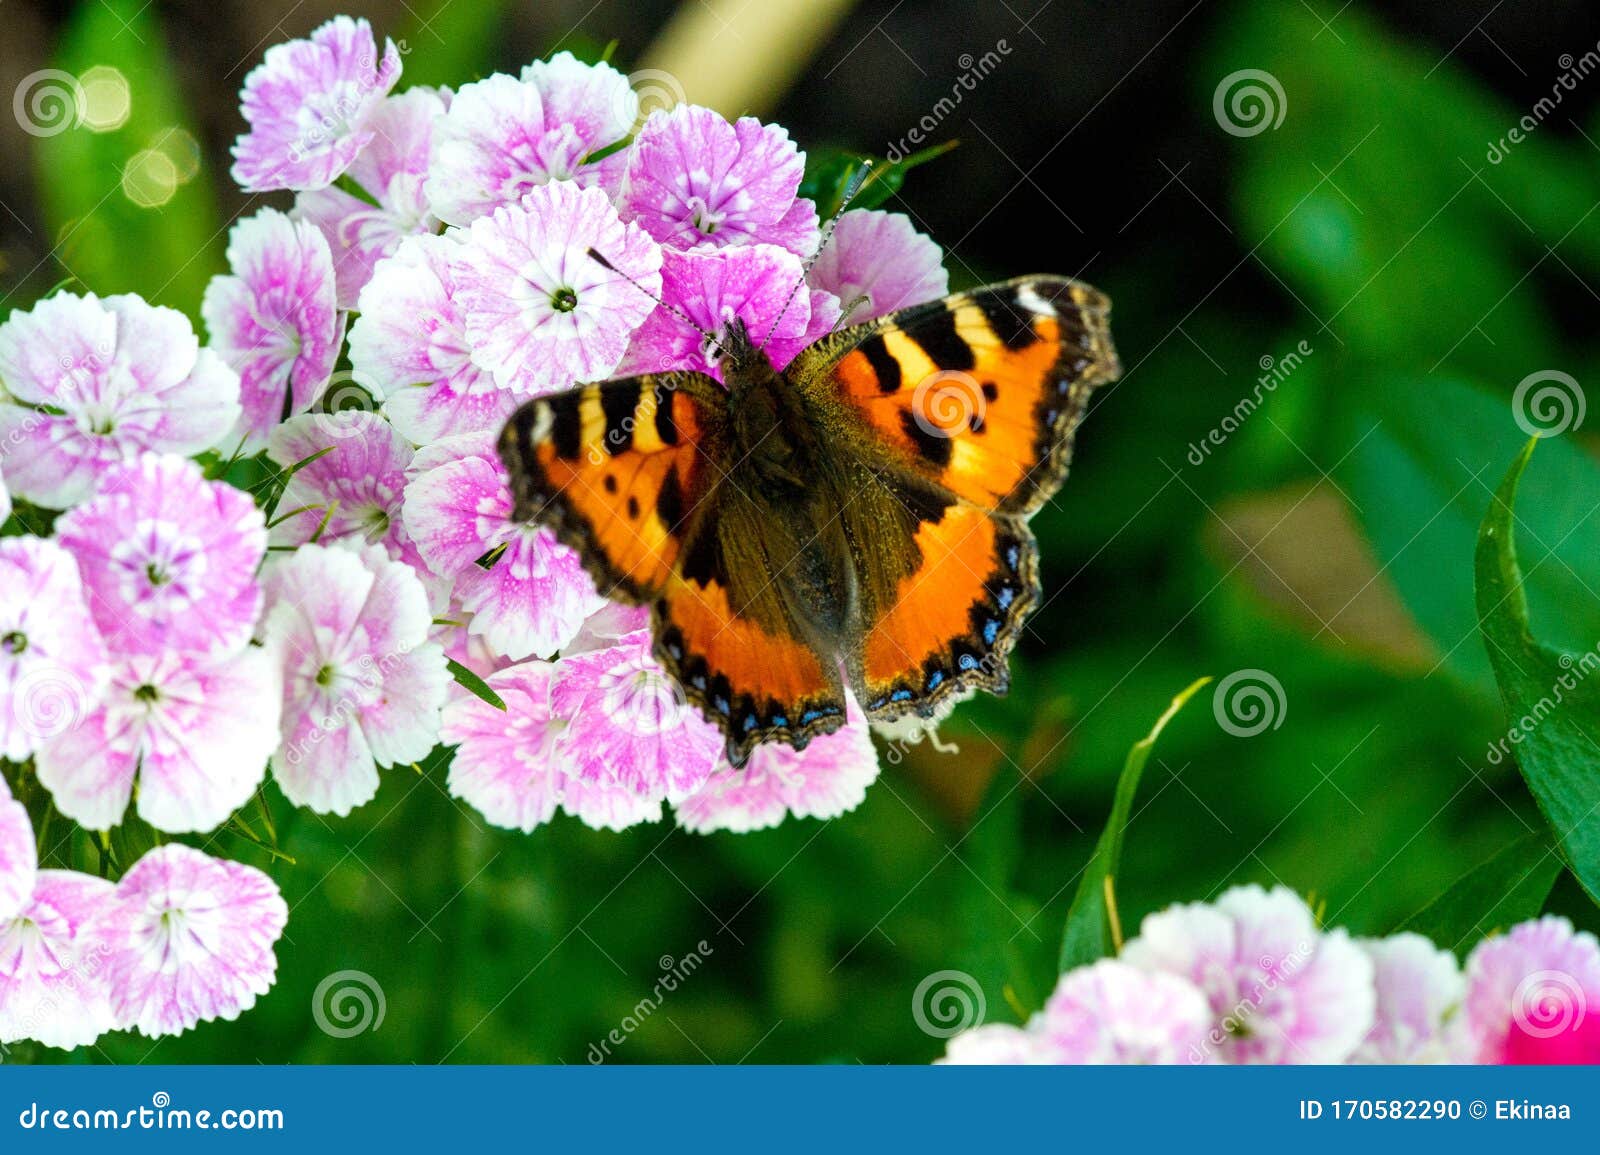 nymphalis xanthomelas, a rare tortoiseshell, is a kind of nymphalide butterfly found in eastern europe and asia. this butterfly is